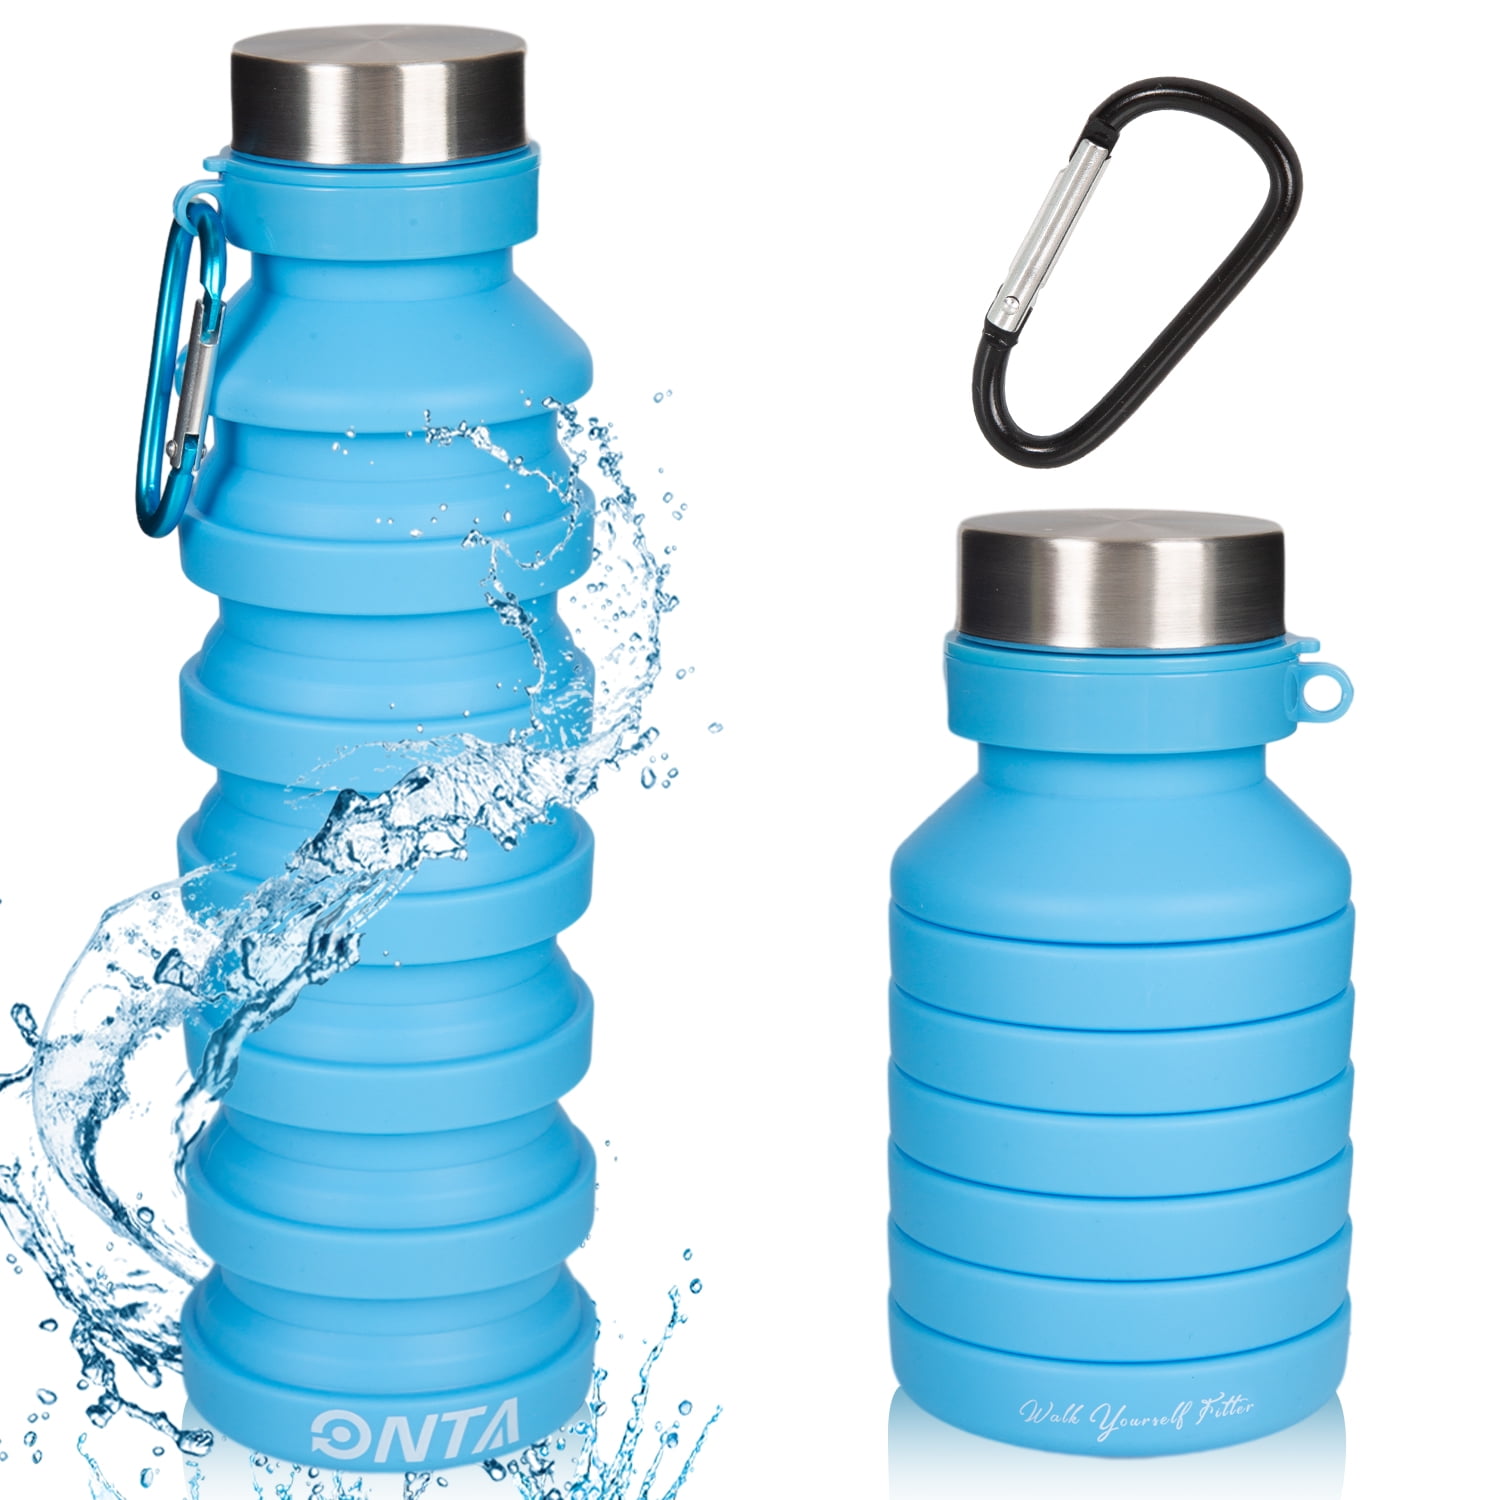 LavoHome BPA-Free Reusable Plastic Water Bottle 5 Gallon Jug Container with  48 mm Screw Cap, Easy Grip Carry Handle, Sports Residential & Commercial